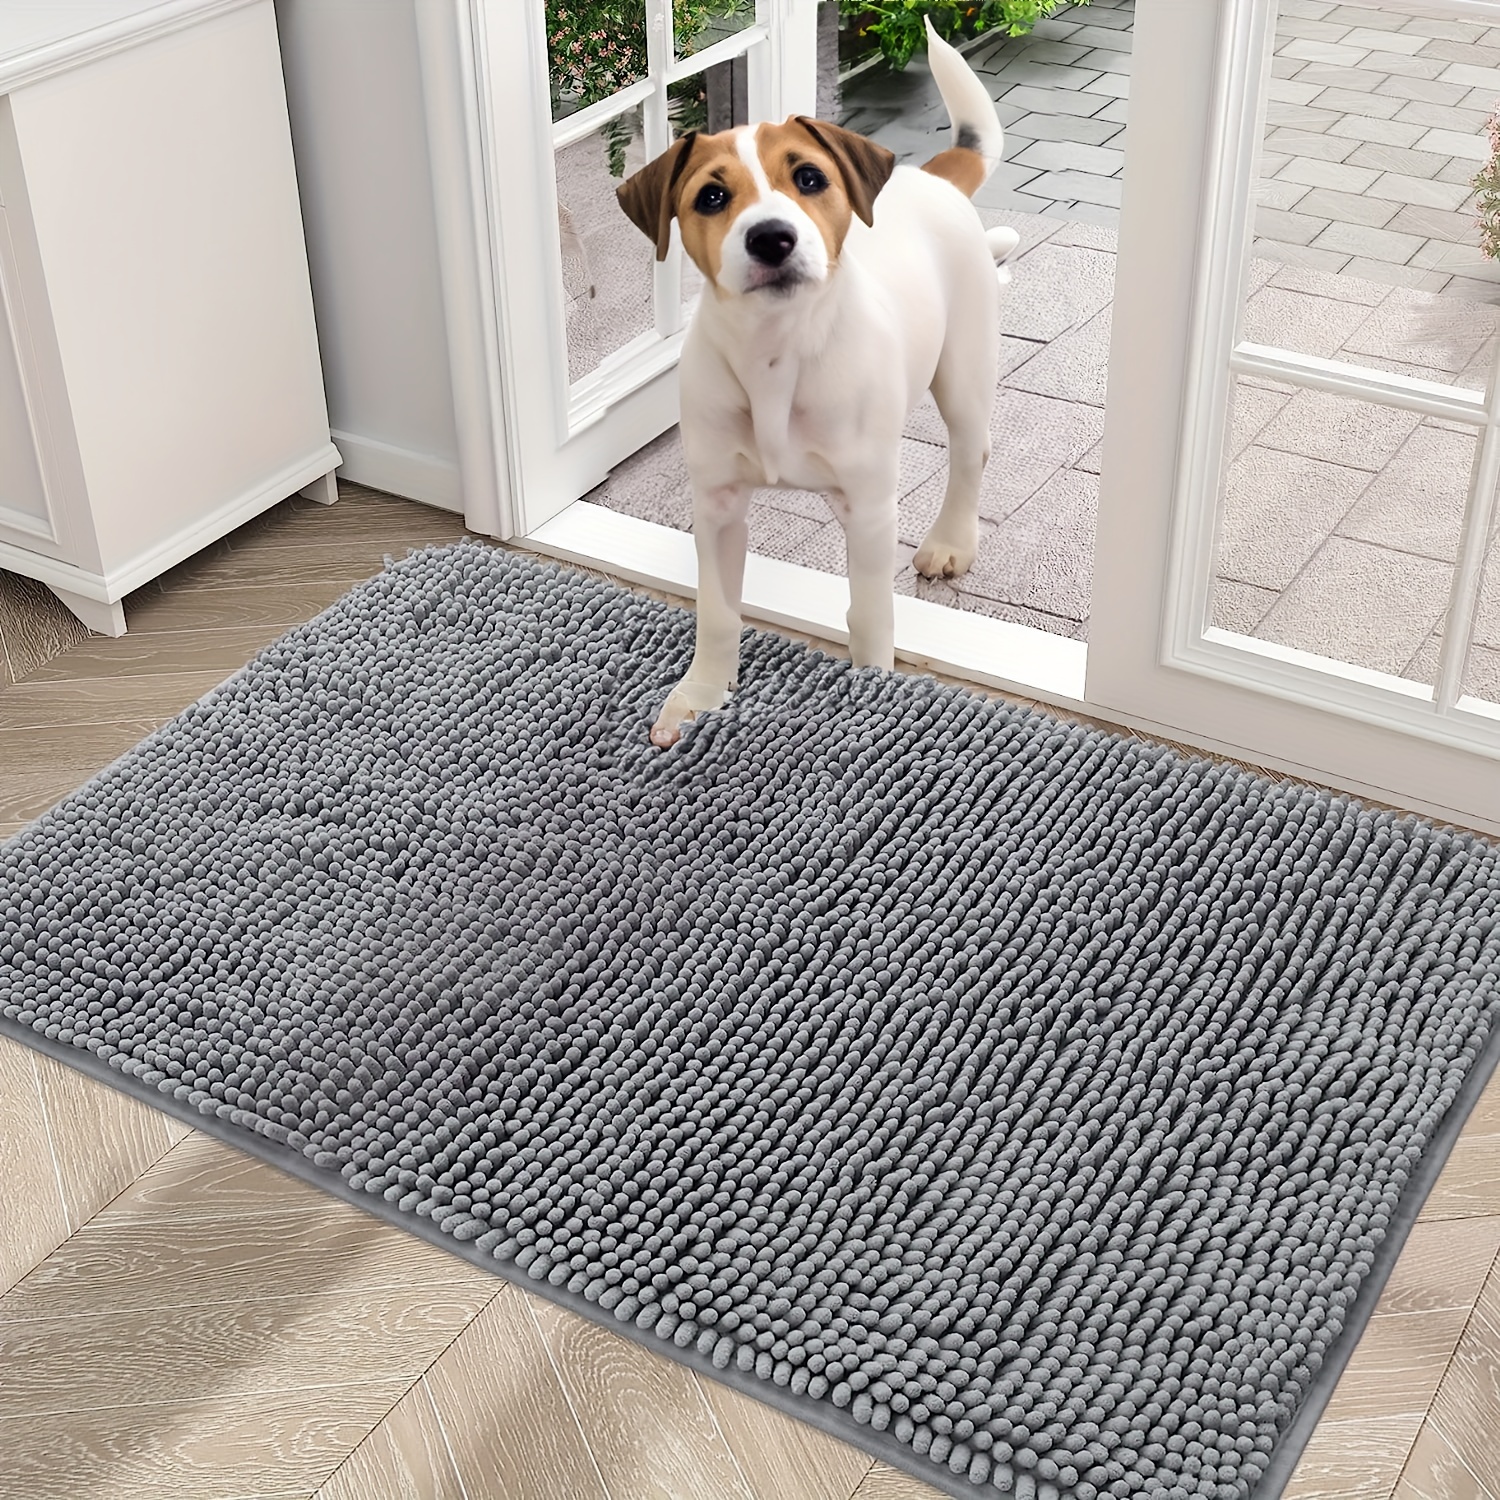 Mud Mat for Dogs, Absorbent Non-Slip Washable,Quick Dry Microfiber,indoor